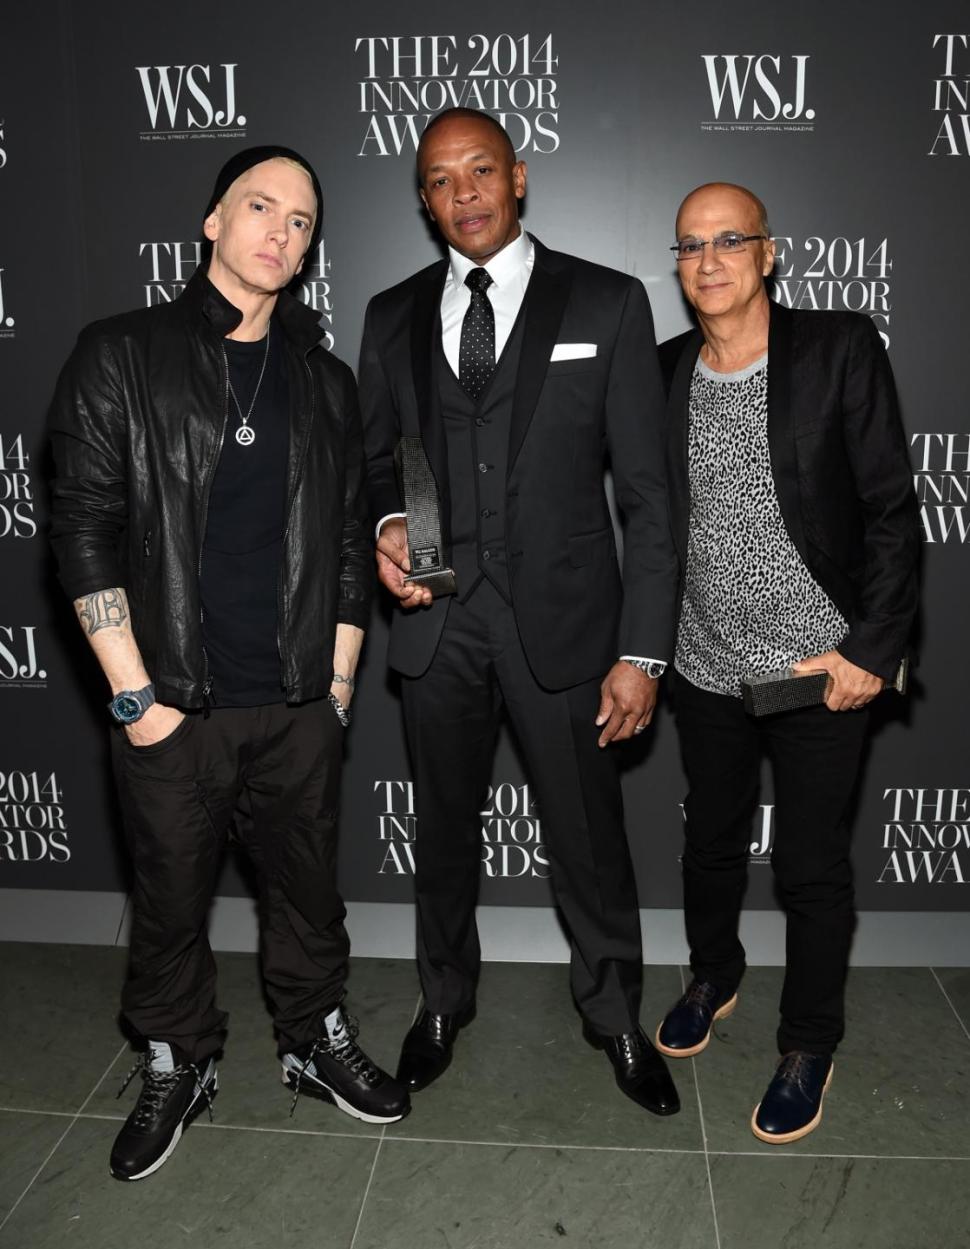 (L-R) Eminem, Dr. Dre and Jimmy Iovine pictured at the event on Wednesday.